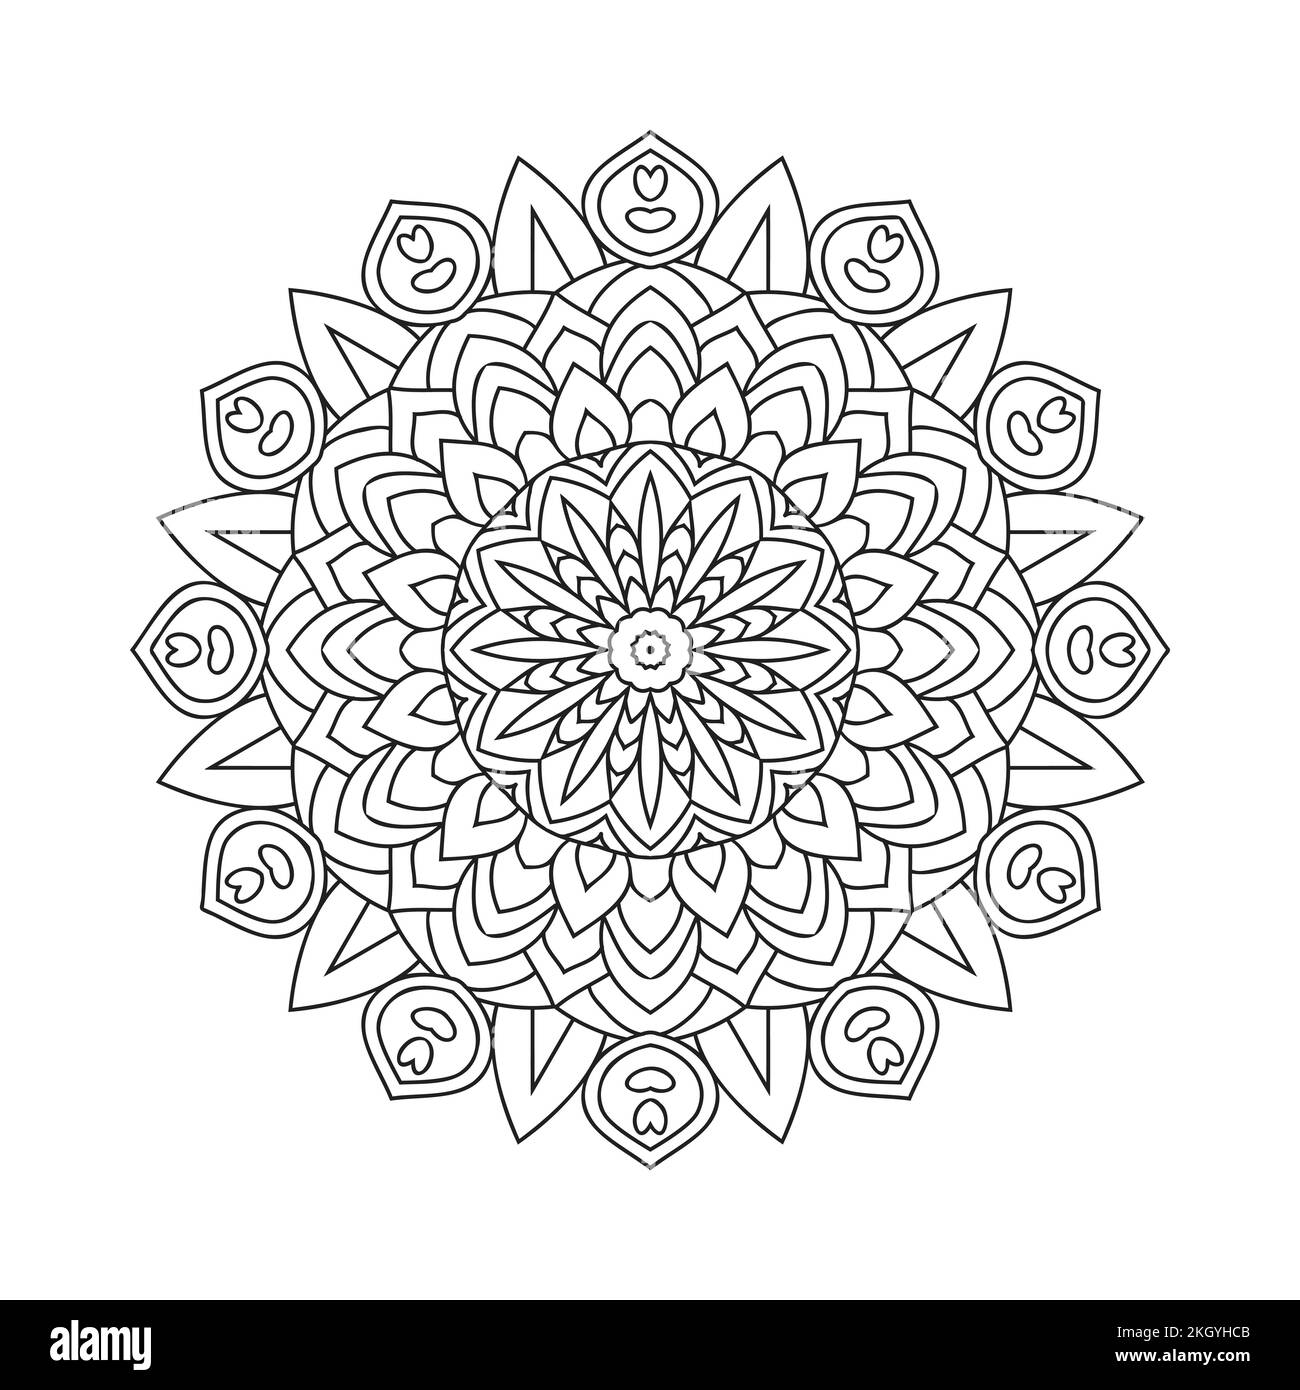 Mandala ornament decoration for coloring pages. Coloring page for kids. Indian style mandala pattern vector. Flower mandala decorative line art for co Stock Vector